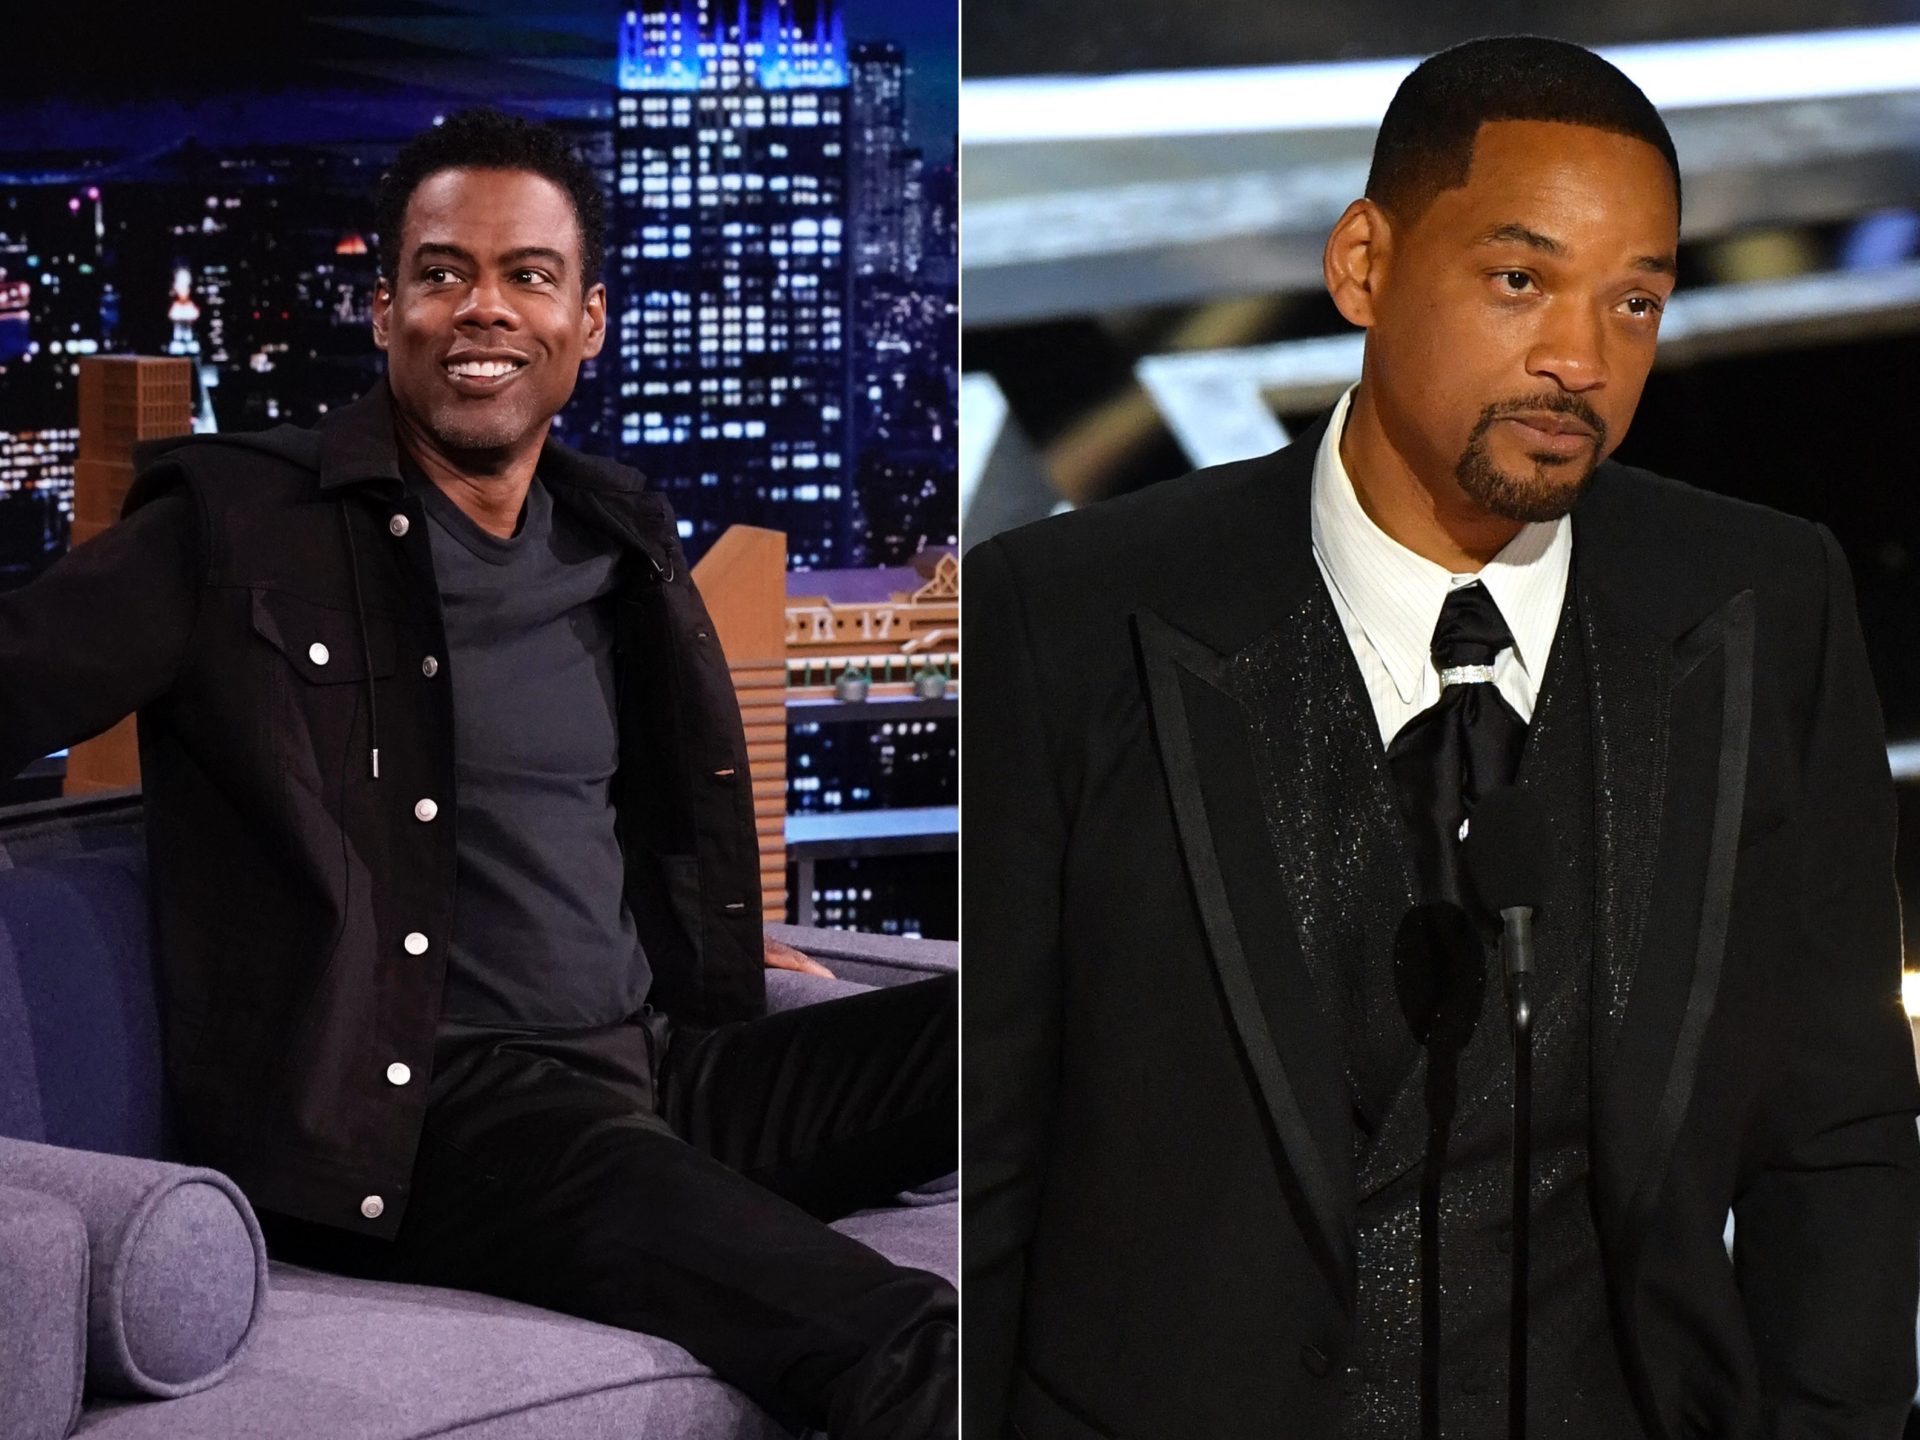 Chris Rock addressed Will Smith's apology video to him about the Oscars slap and says that the video was a "hostage" video.